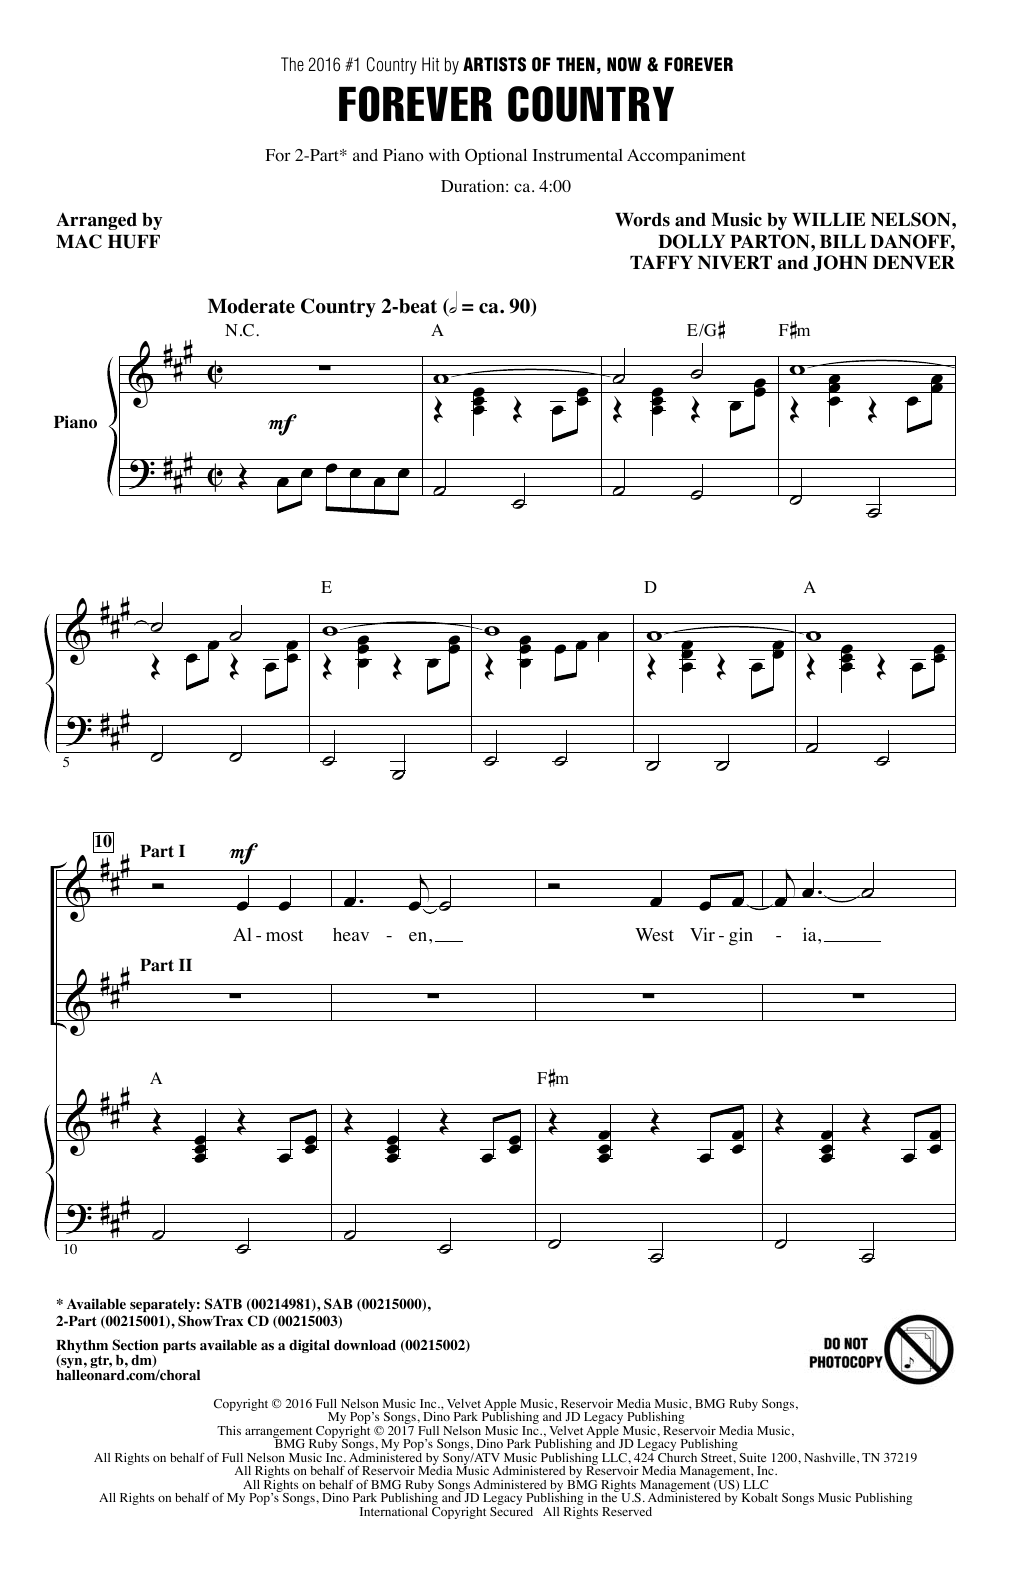 Download Artists of Then, Now & Forever Forever Country (arr. Mac Huff) Sheet Music